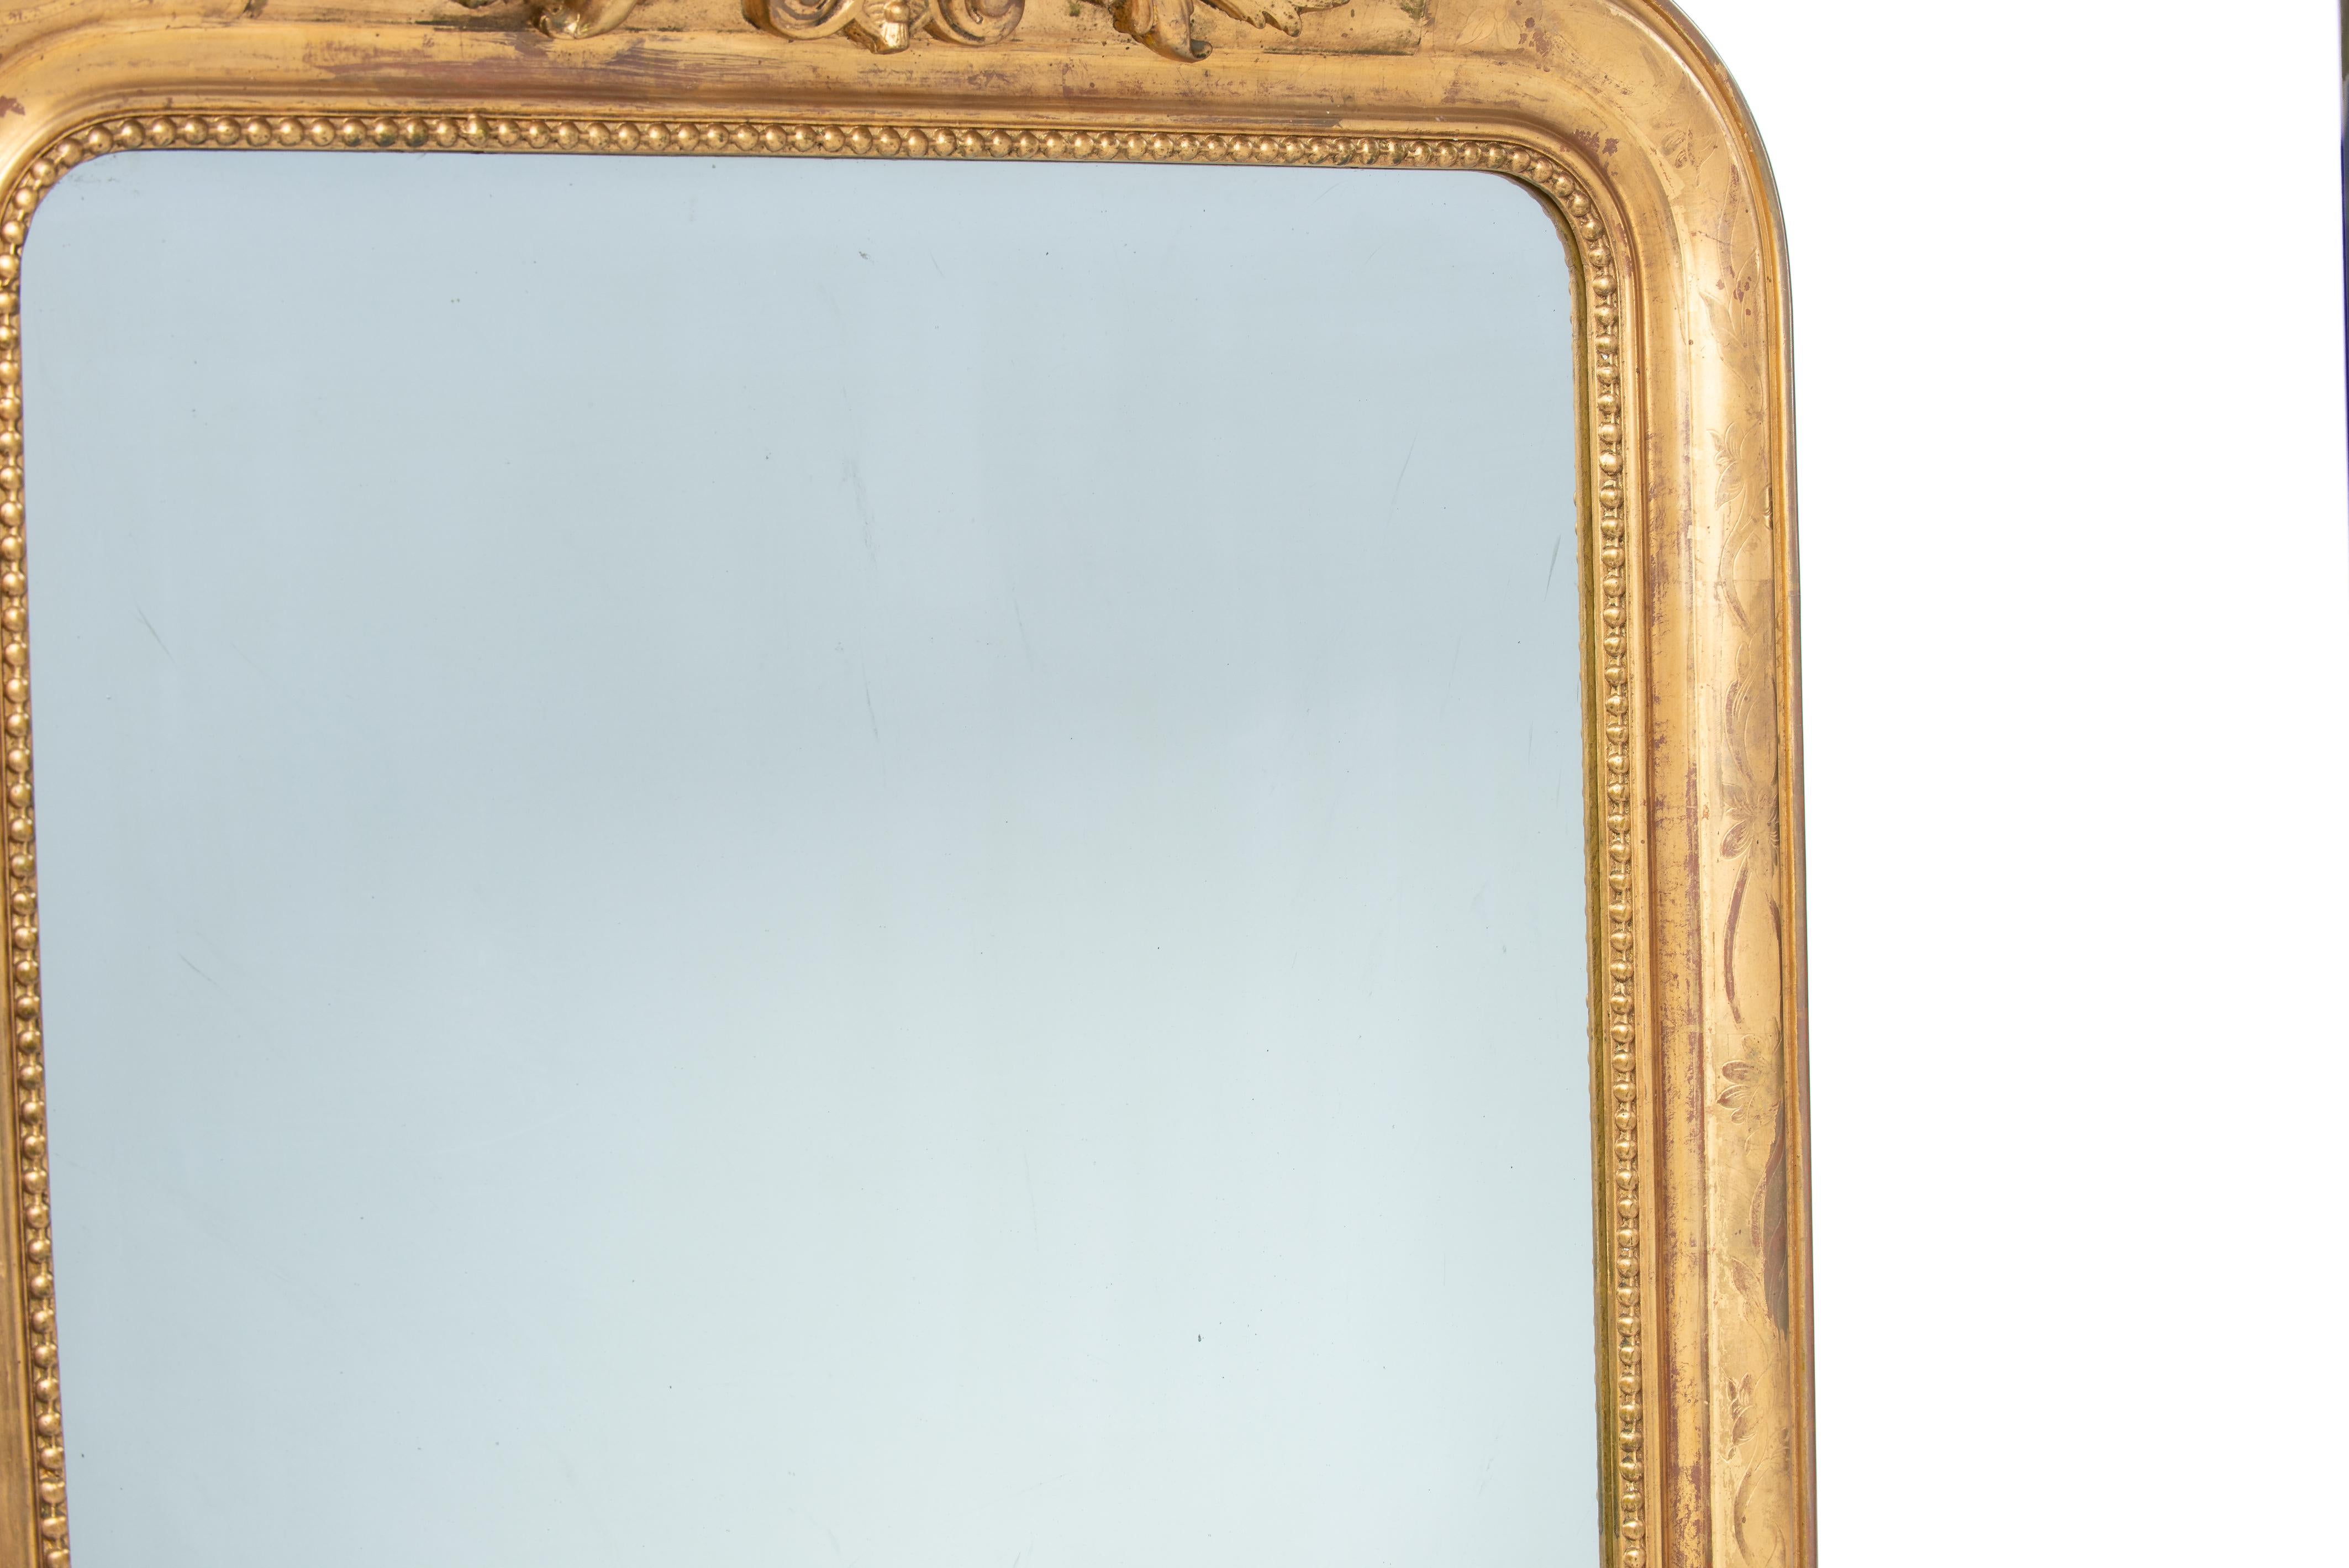 Gilt Antique 19th-century French gold leaf gilt Louis Philippe mirror with crest